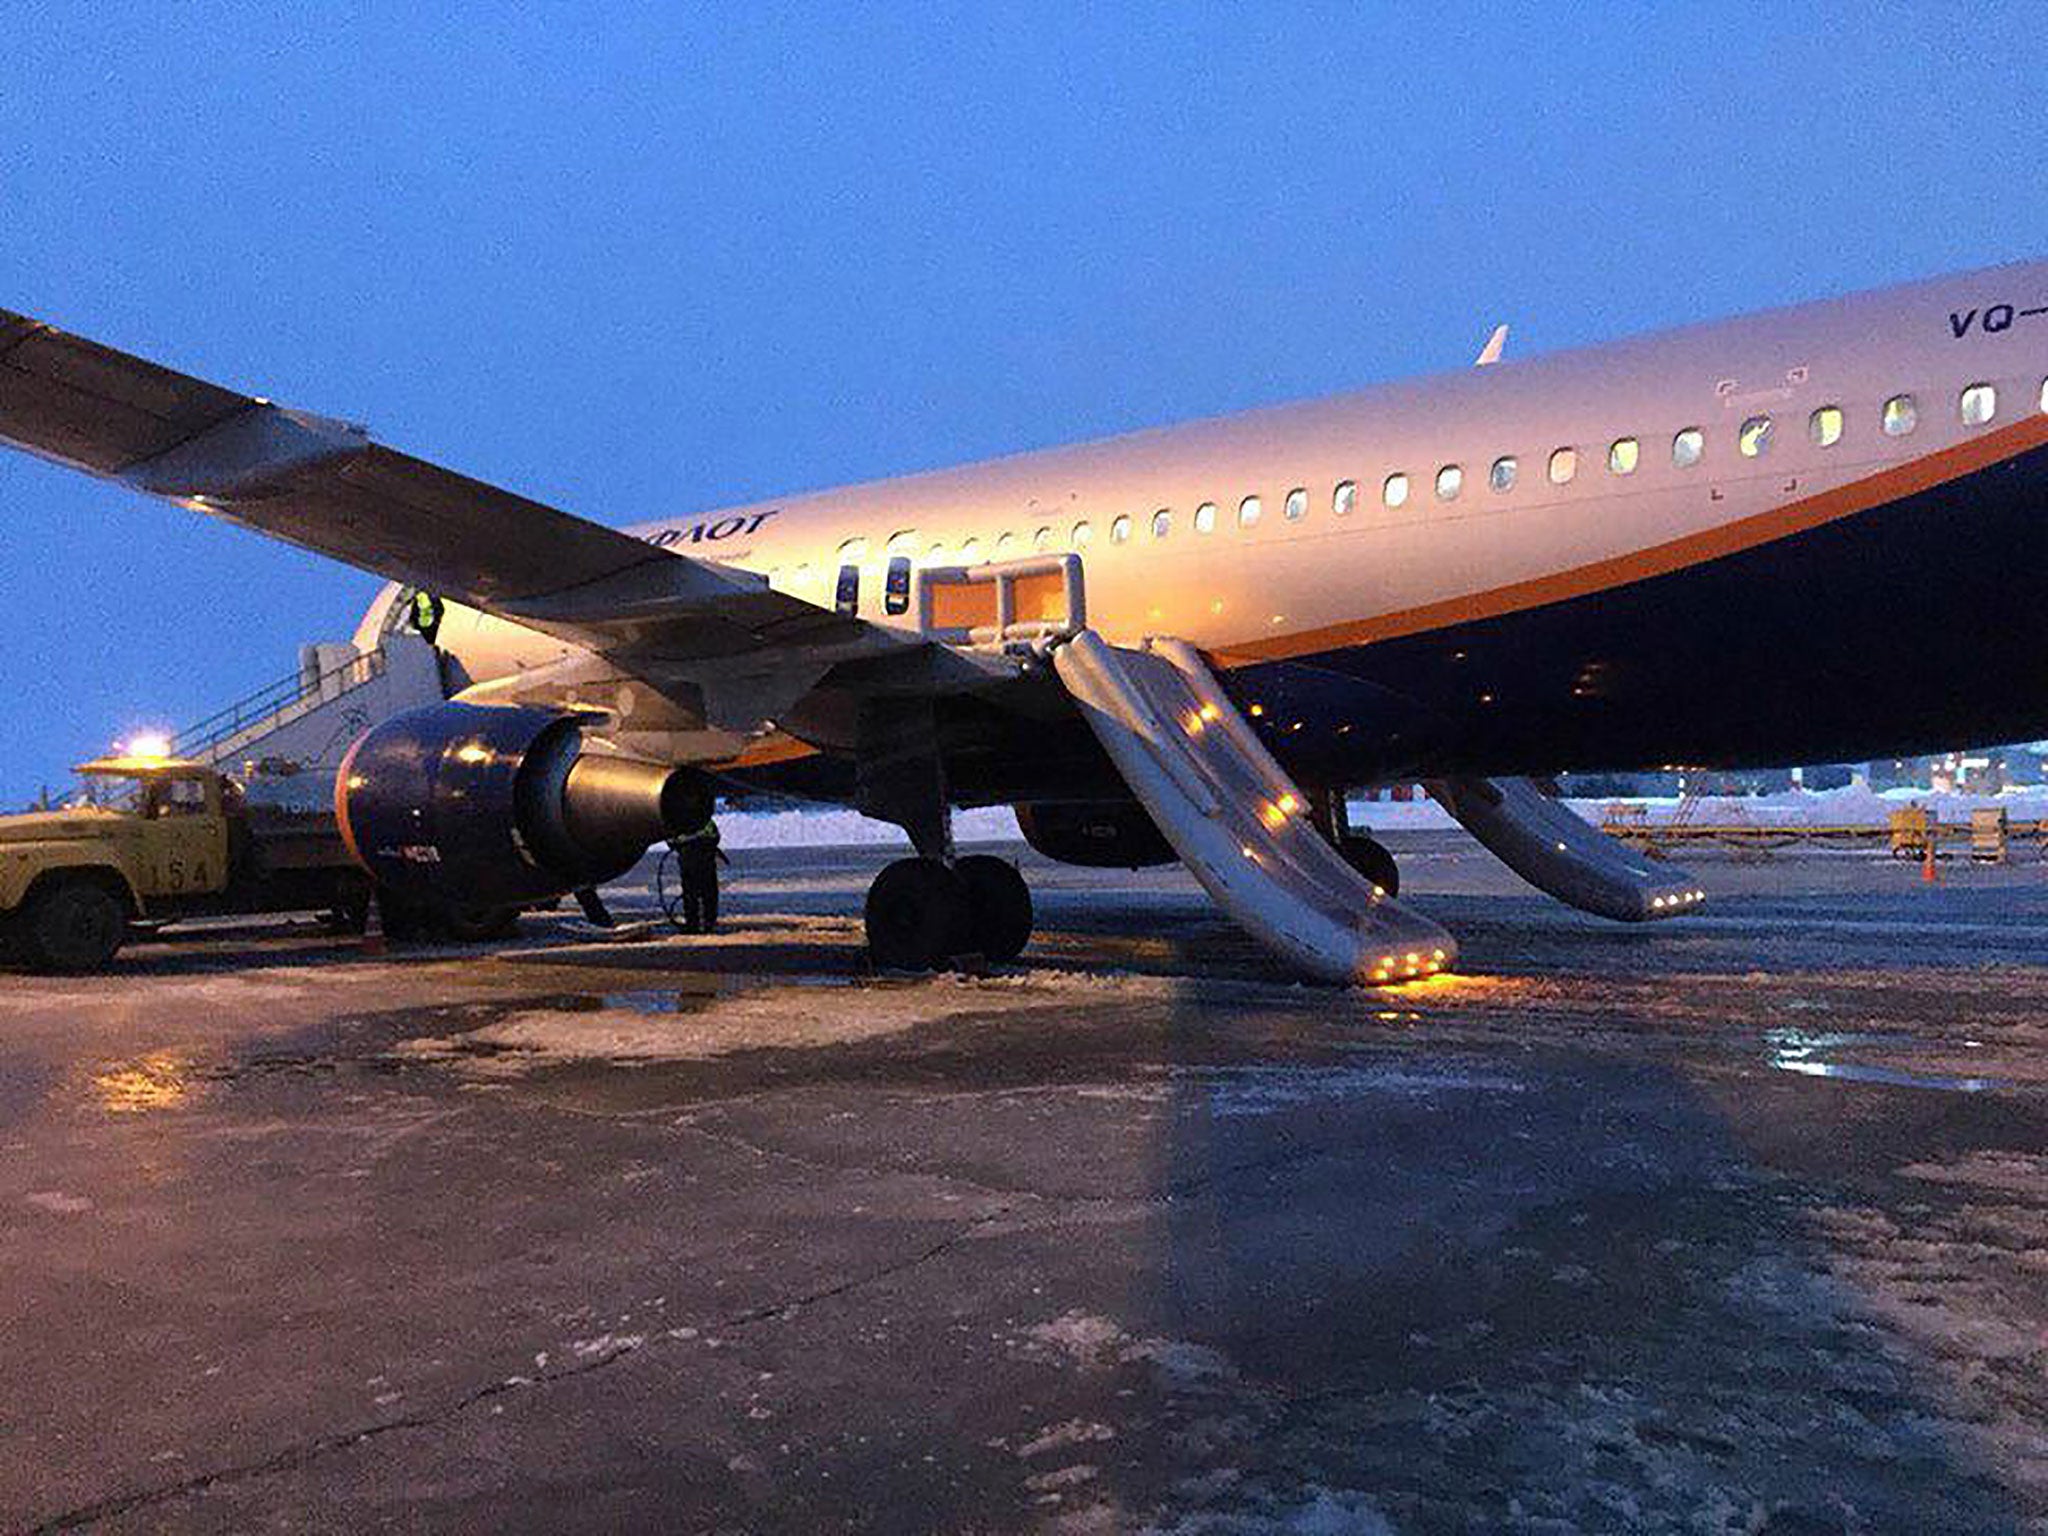 The Aeroflot plane arrived in Volgograd from Moscow on Wednesday evening